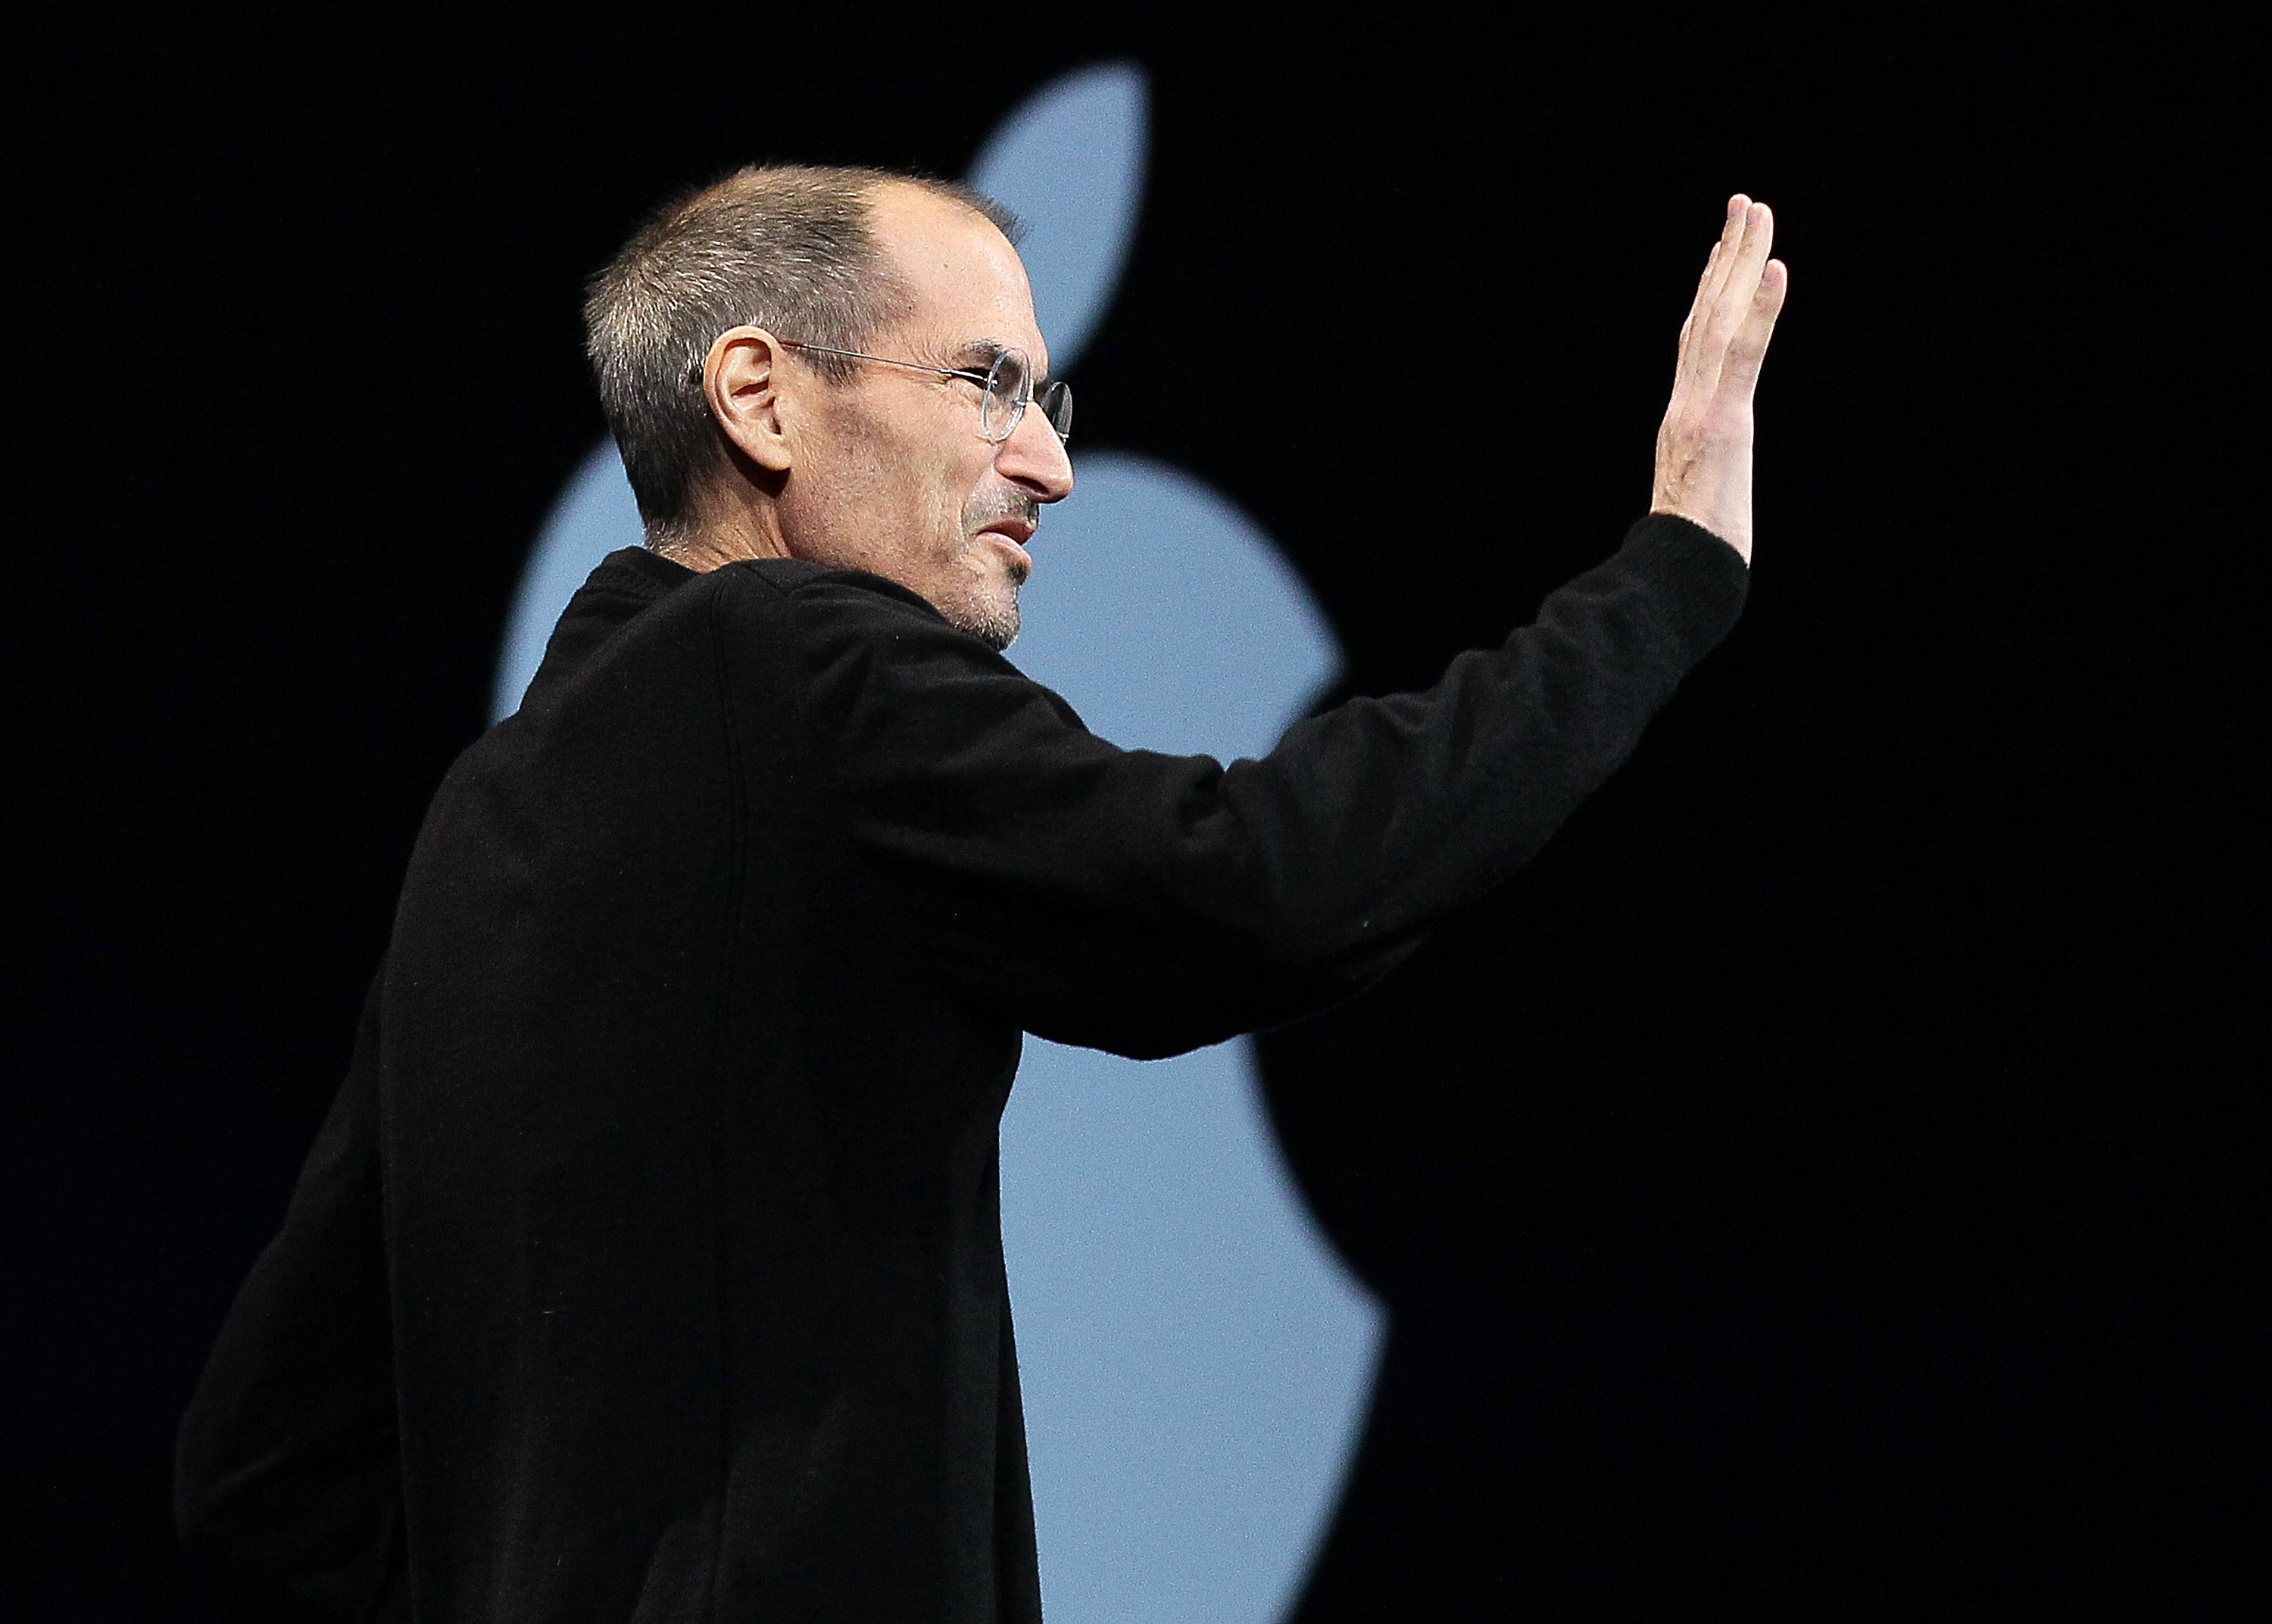 Steve Jobs Introduces iCloud Storage System At Apple's Worldwide Developers Conference